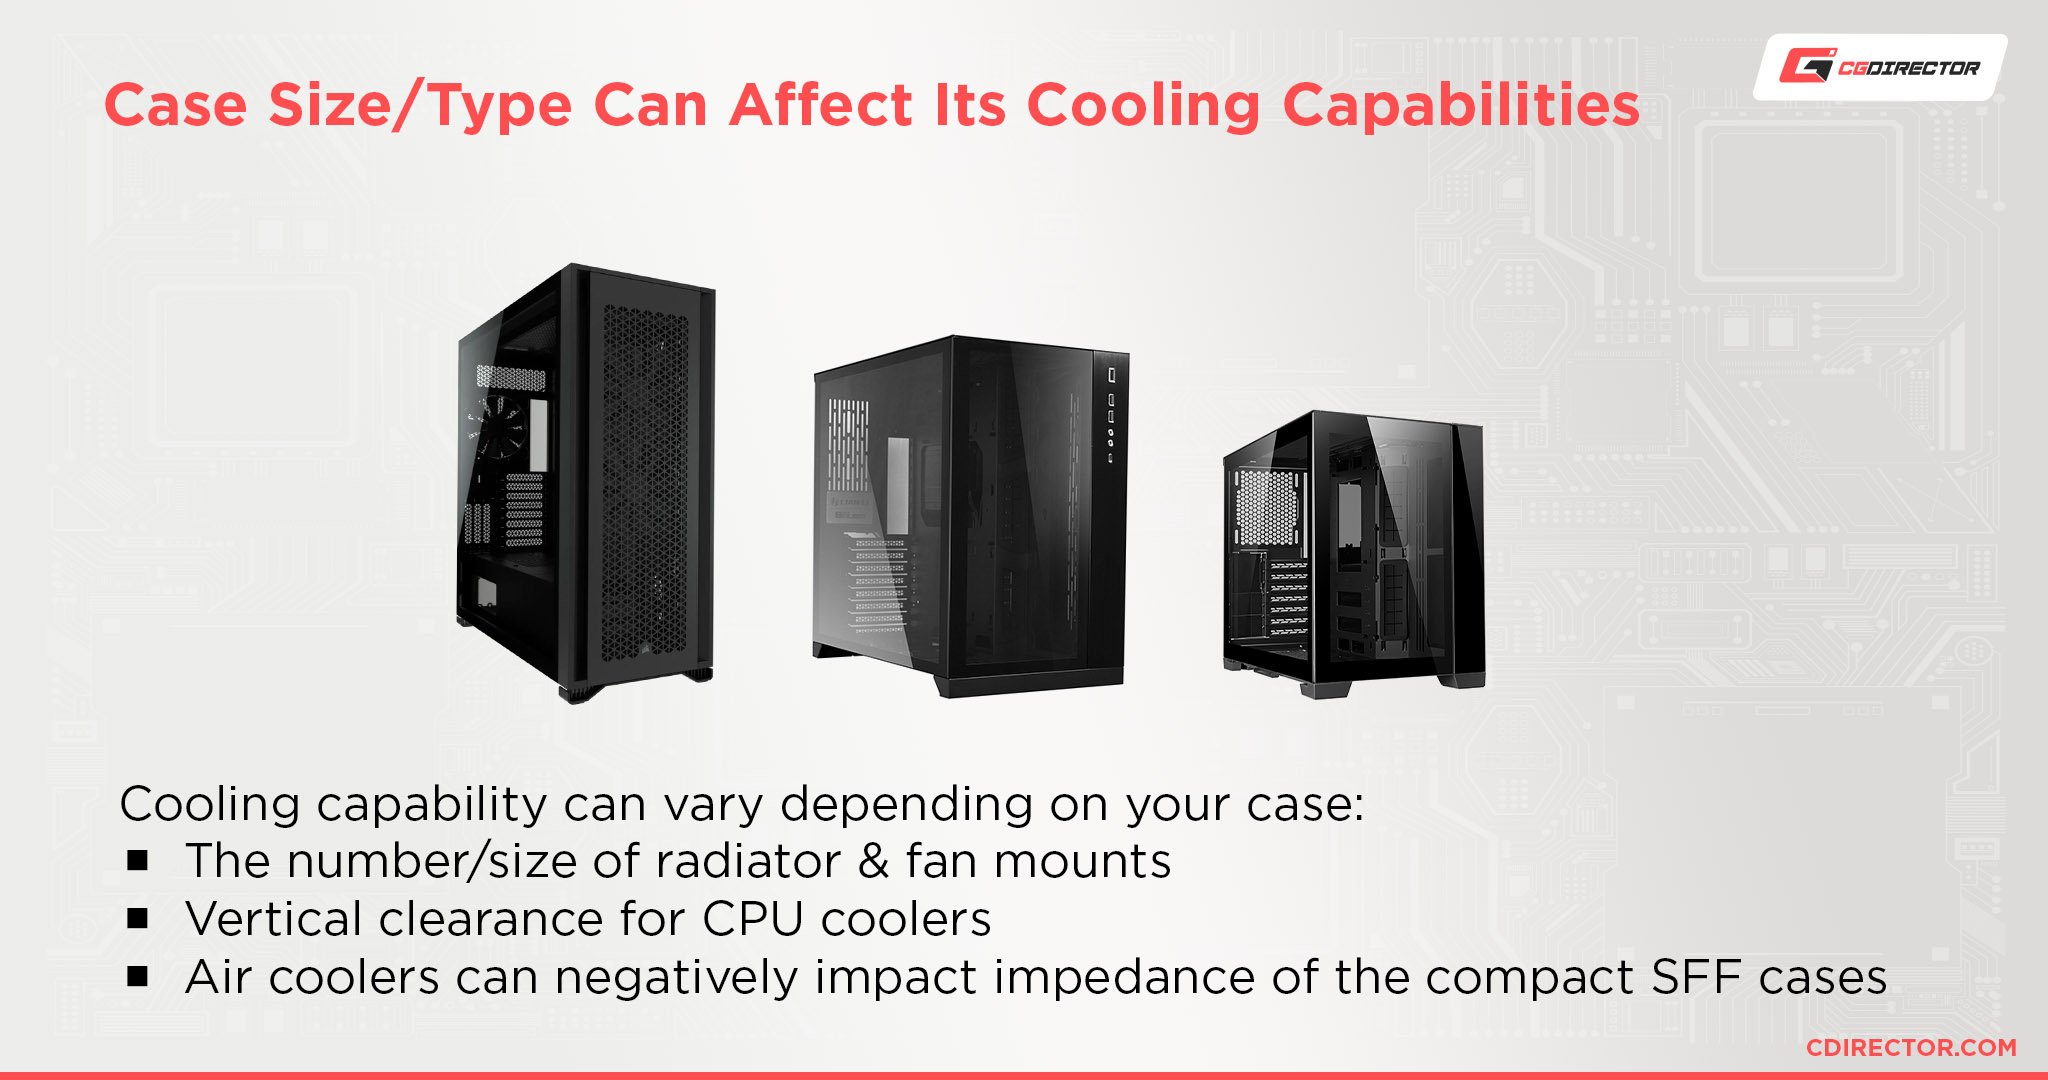 Case Size and Cooling Capabilities